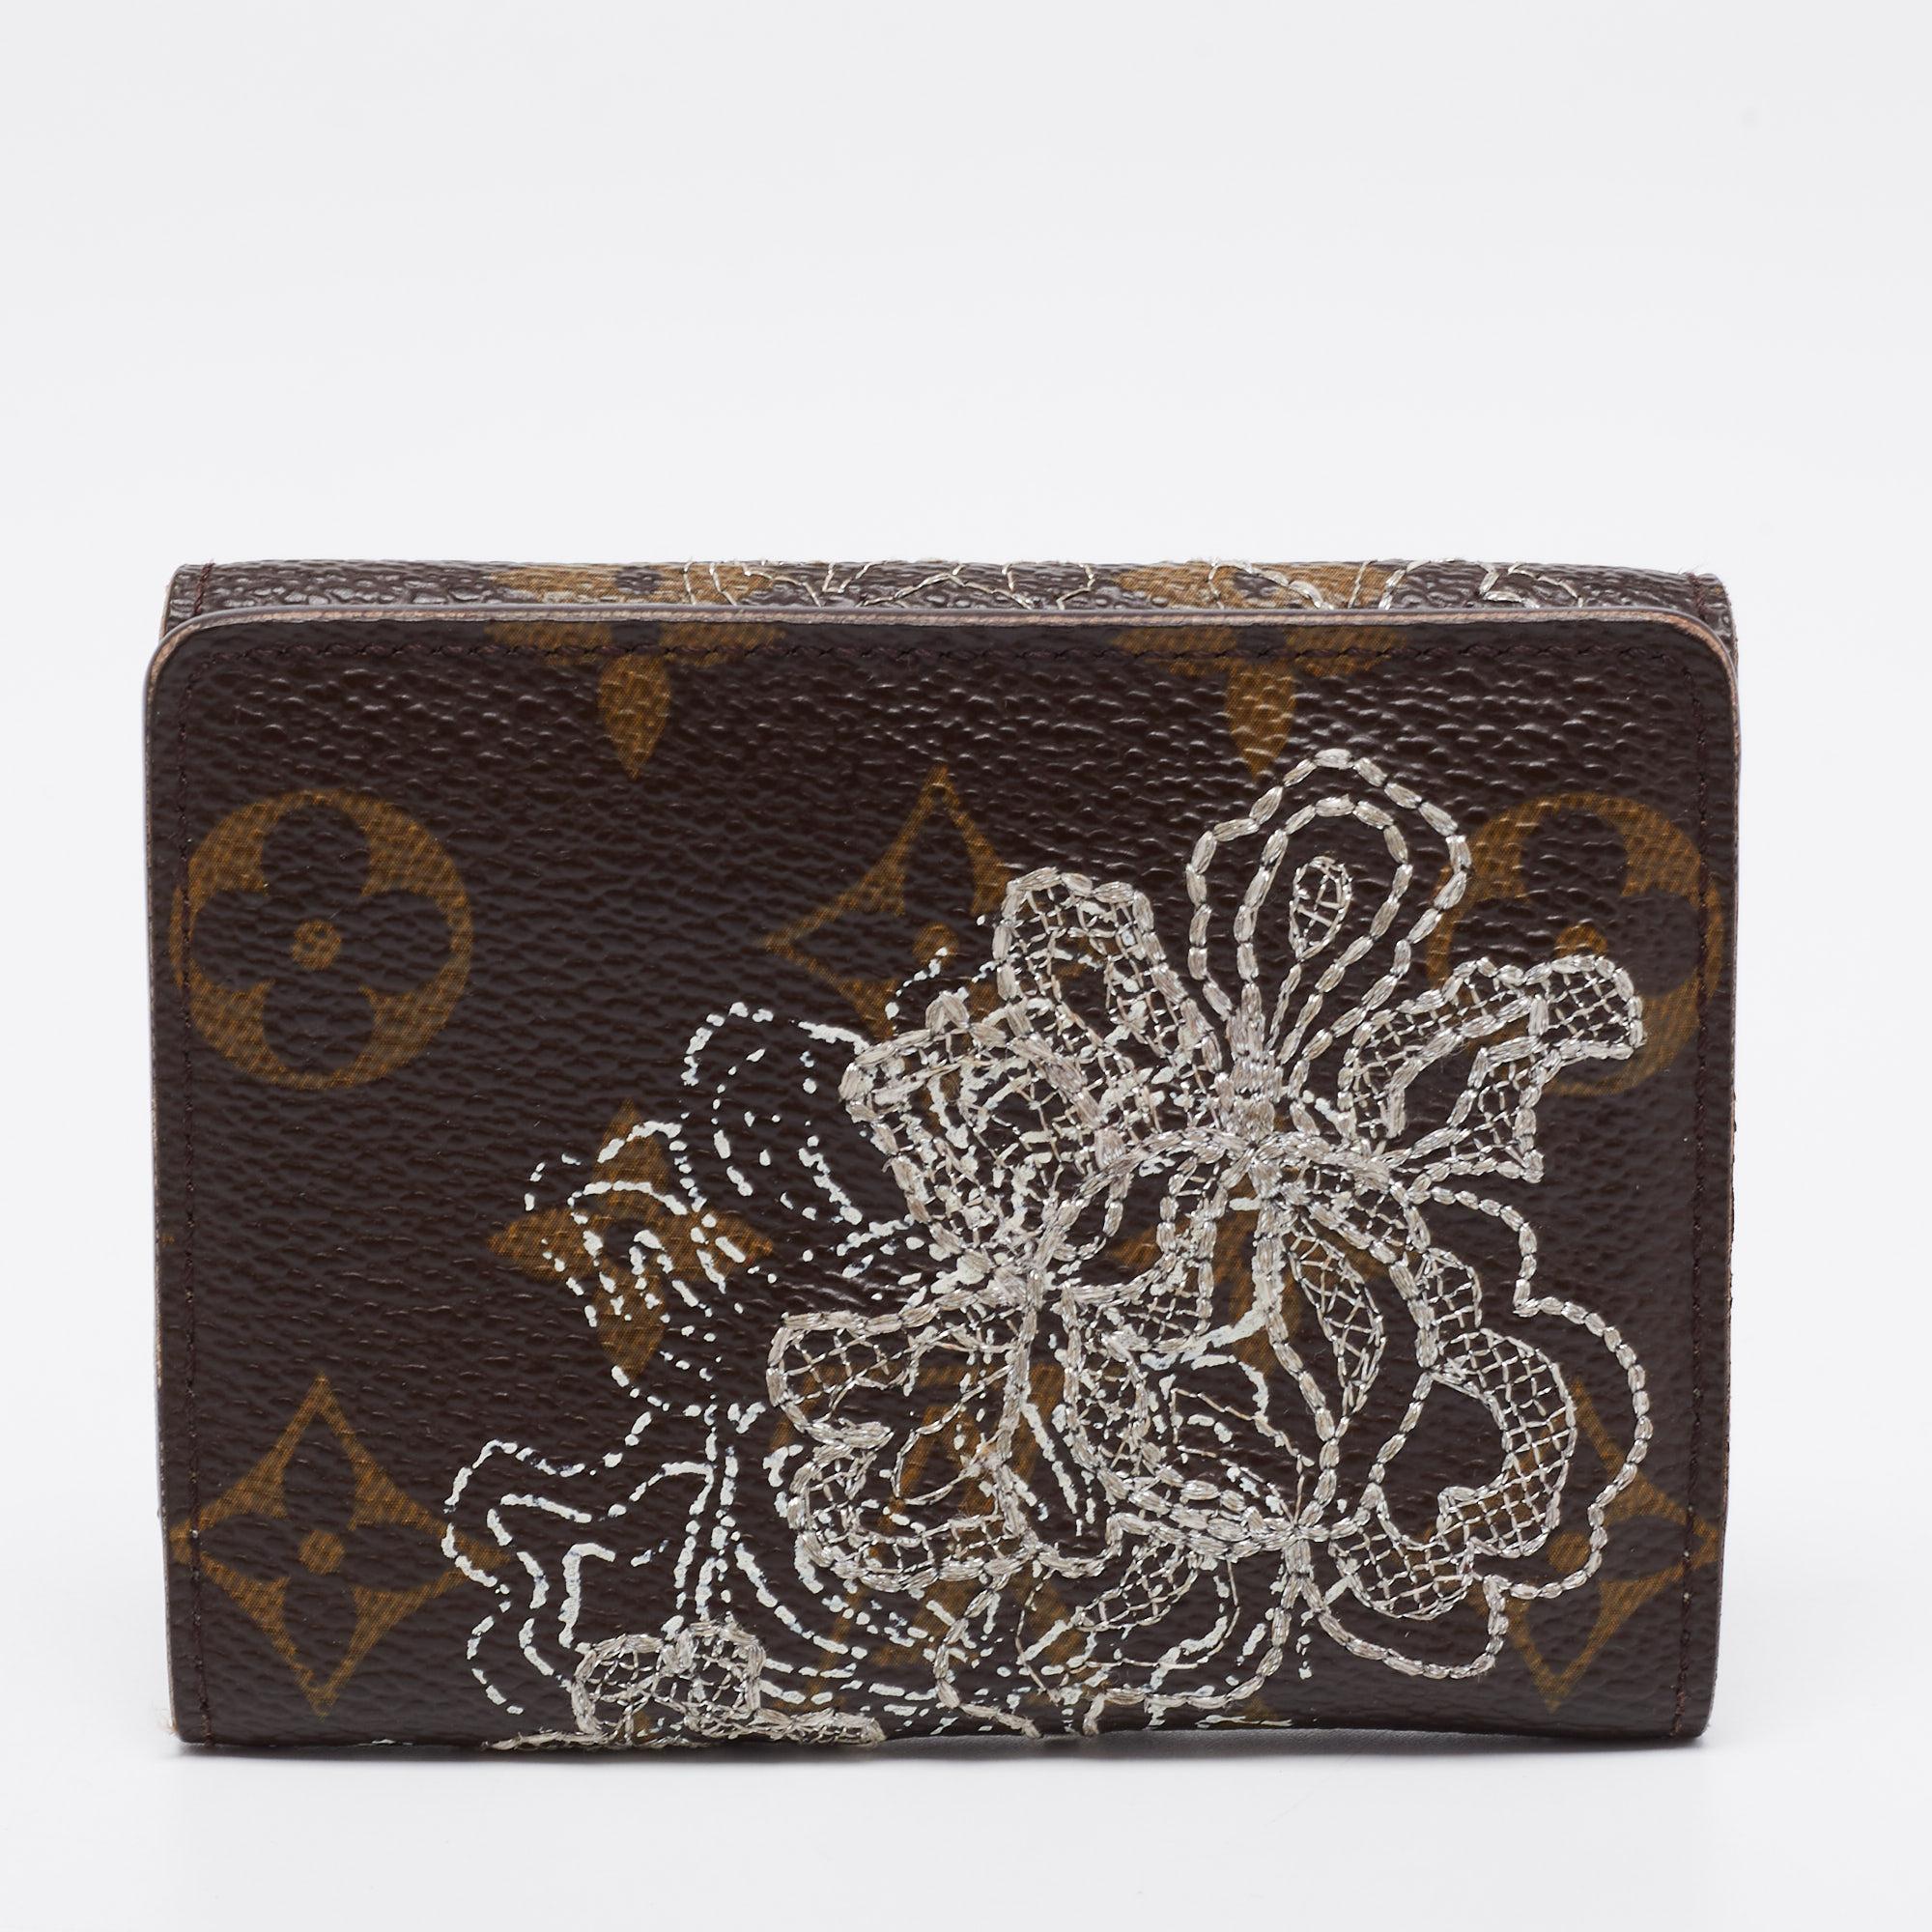 Packed with functional features of card slots and lined compartments, the Limited Edition Dentelle Ludlow wallet is neatly wrapped close with a metal press stud. It is crafted using monogram canvas and decorated with stitch patterns.

